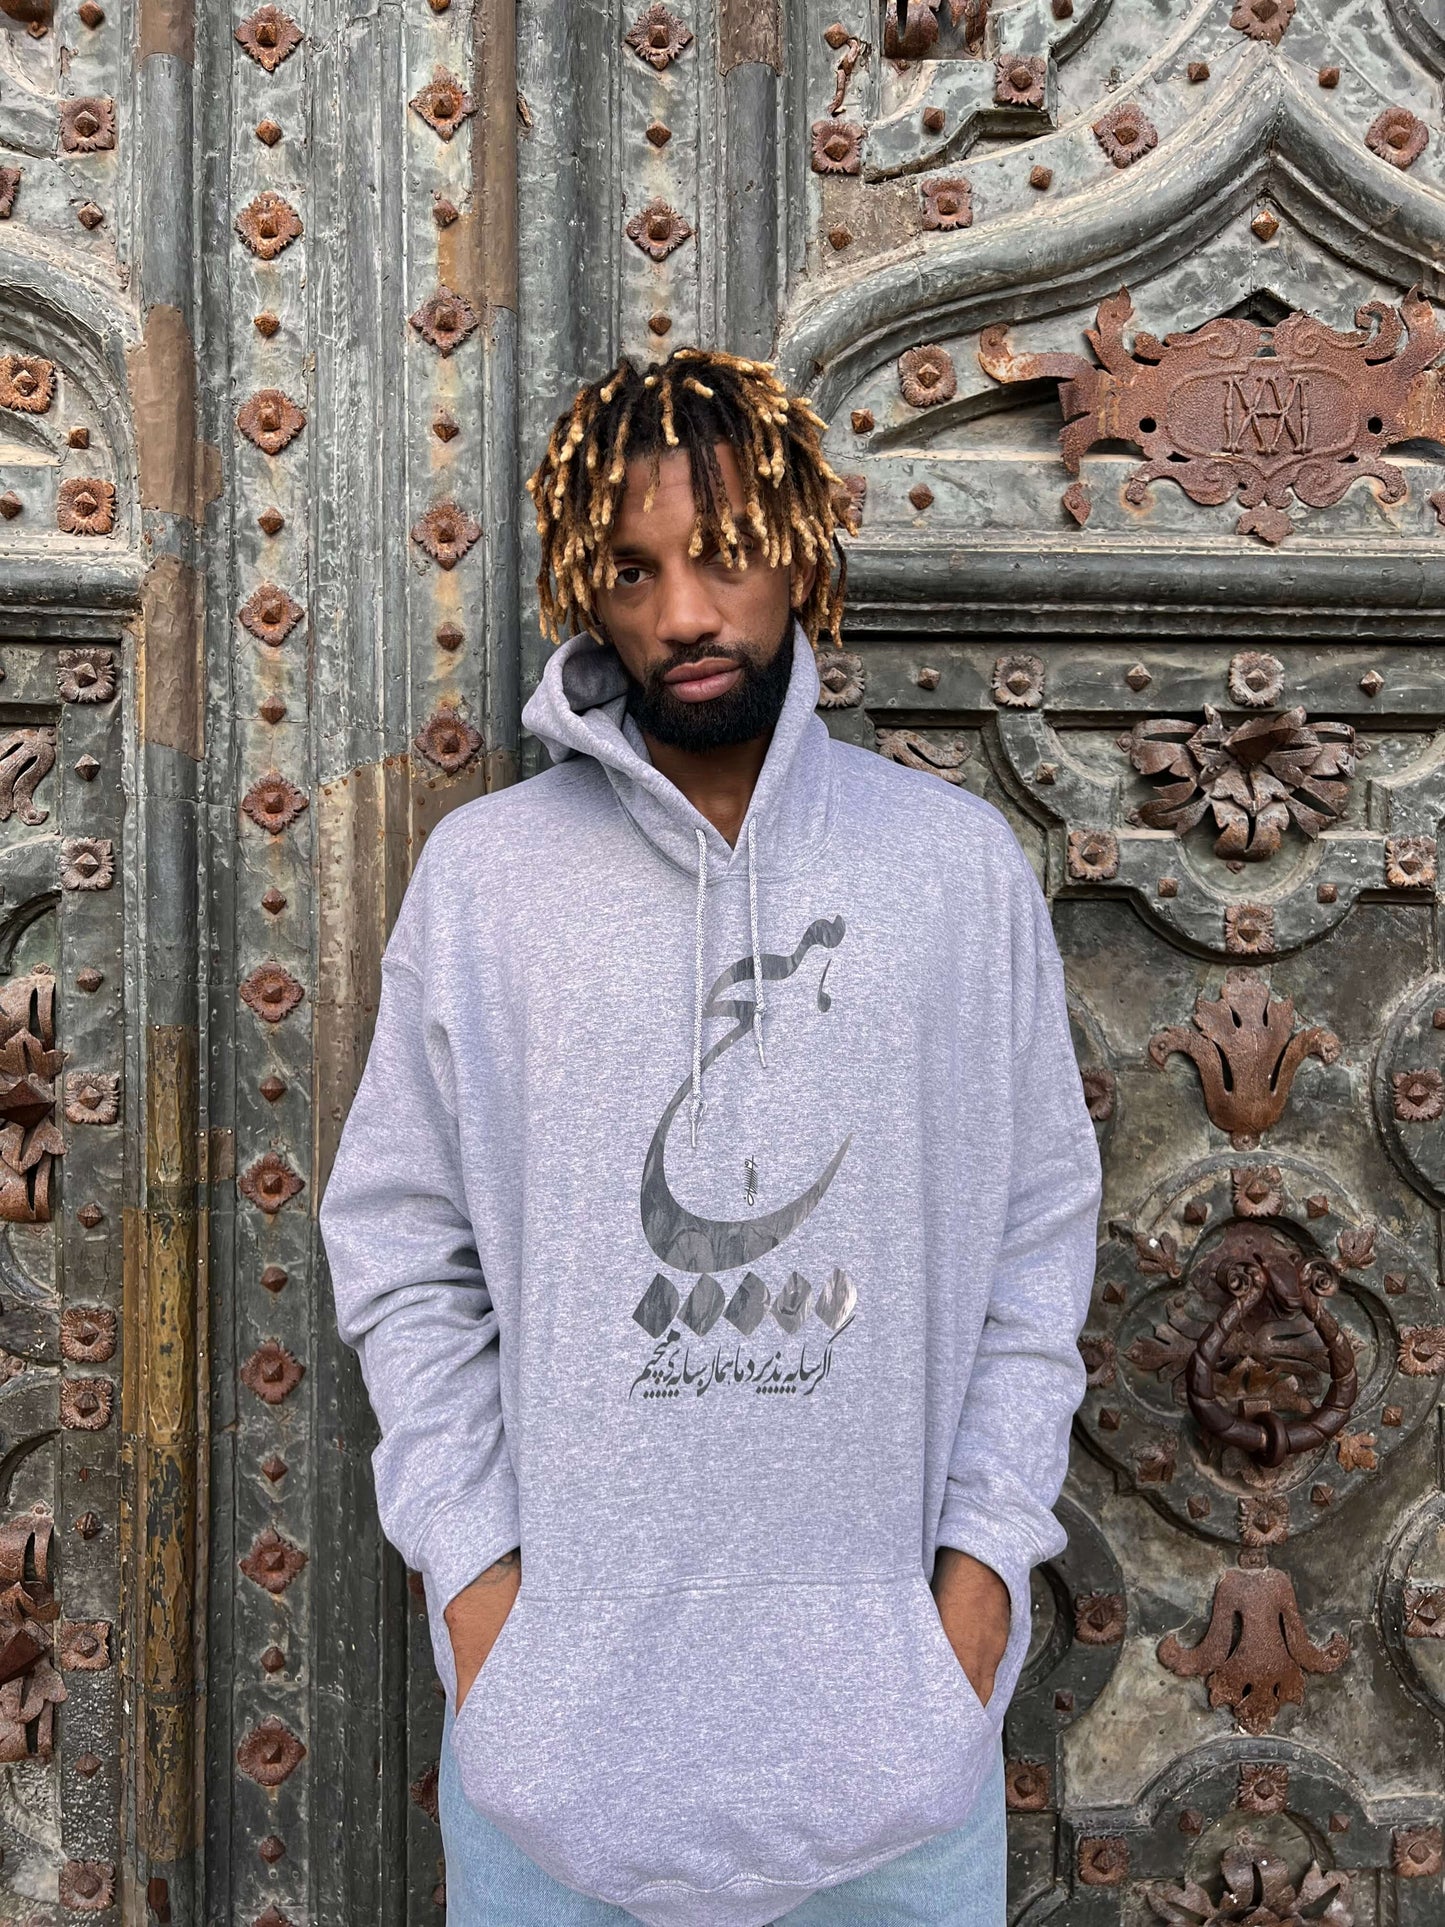 Khem birch is wearing Cozy hoodie in muted grey, styled with elegance.